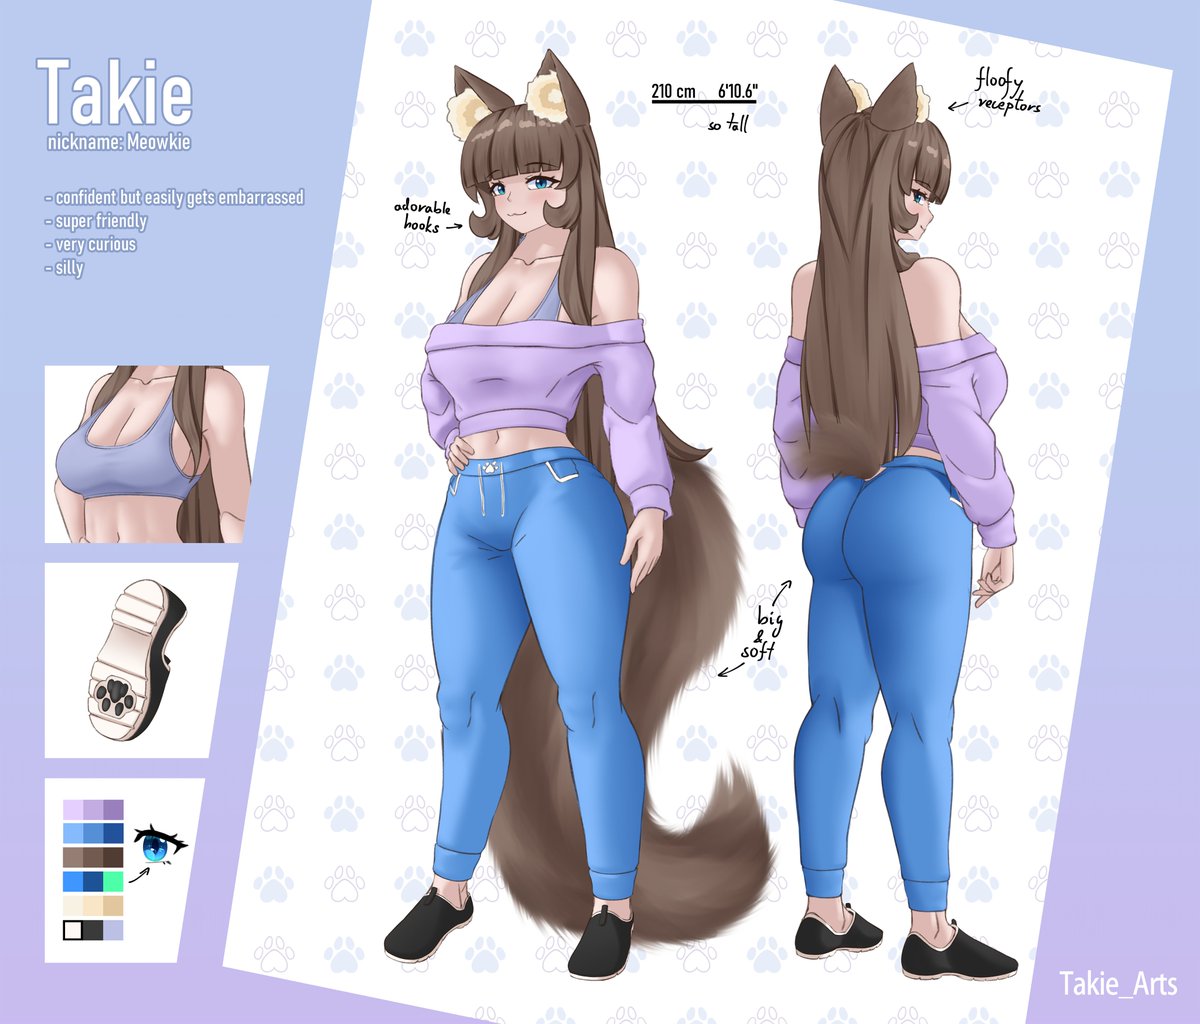 Made a simple Takie ref sheet 🐱